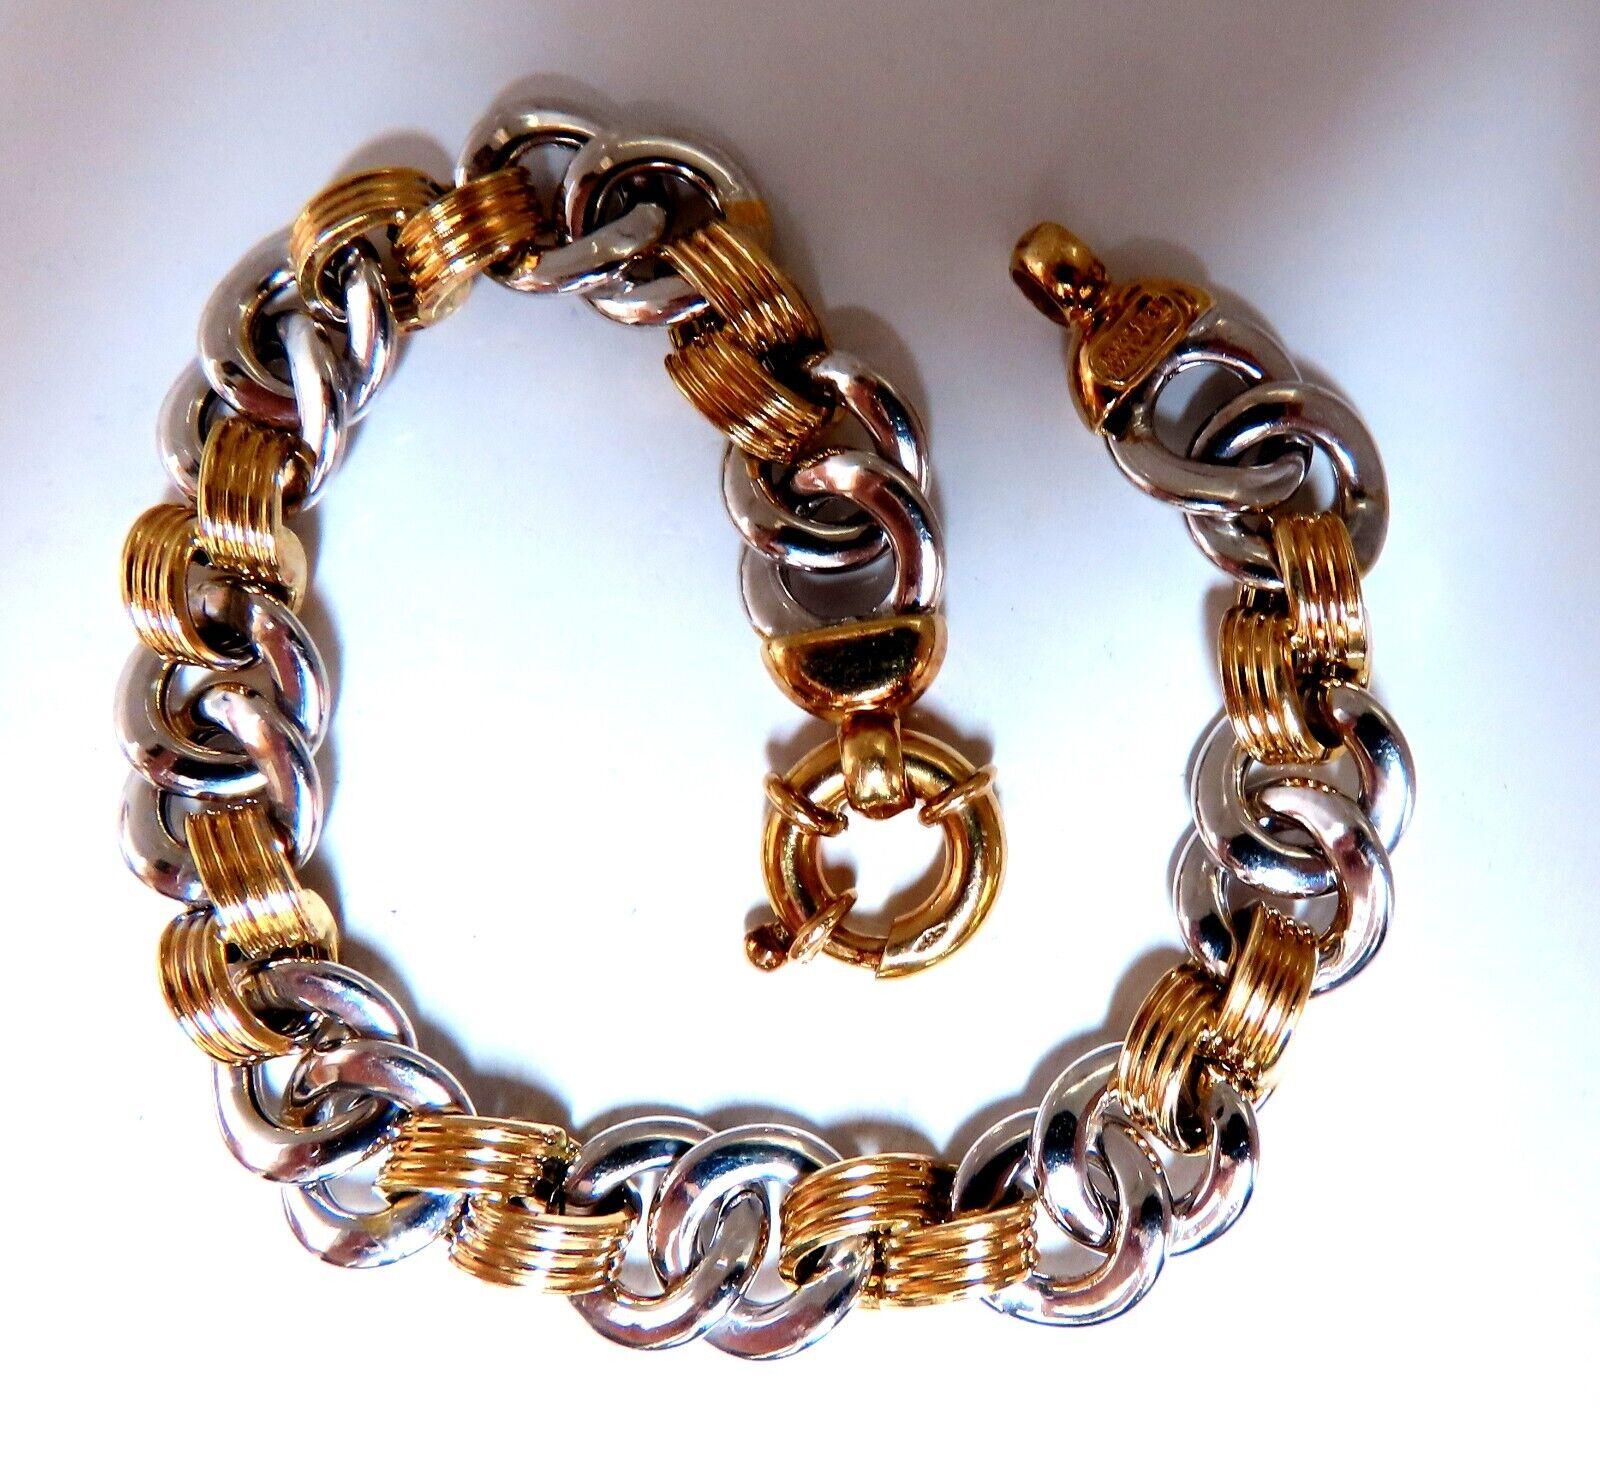 Looping Chain Link Bracelet

Durable, Well Made

14kt. yellow / White gold

15 Grams.

7.5 inch long

10mm wide 